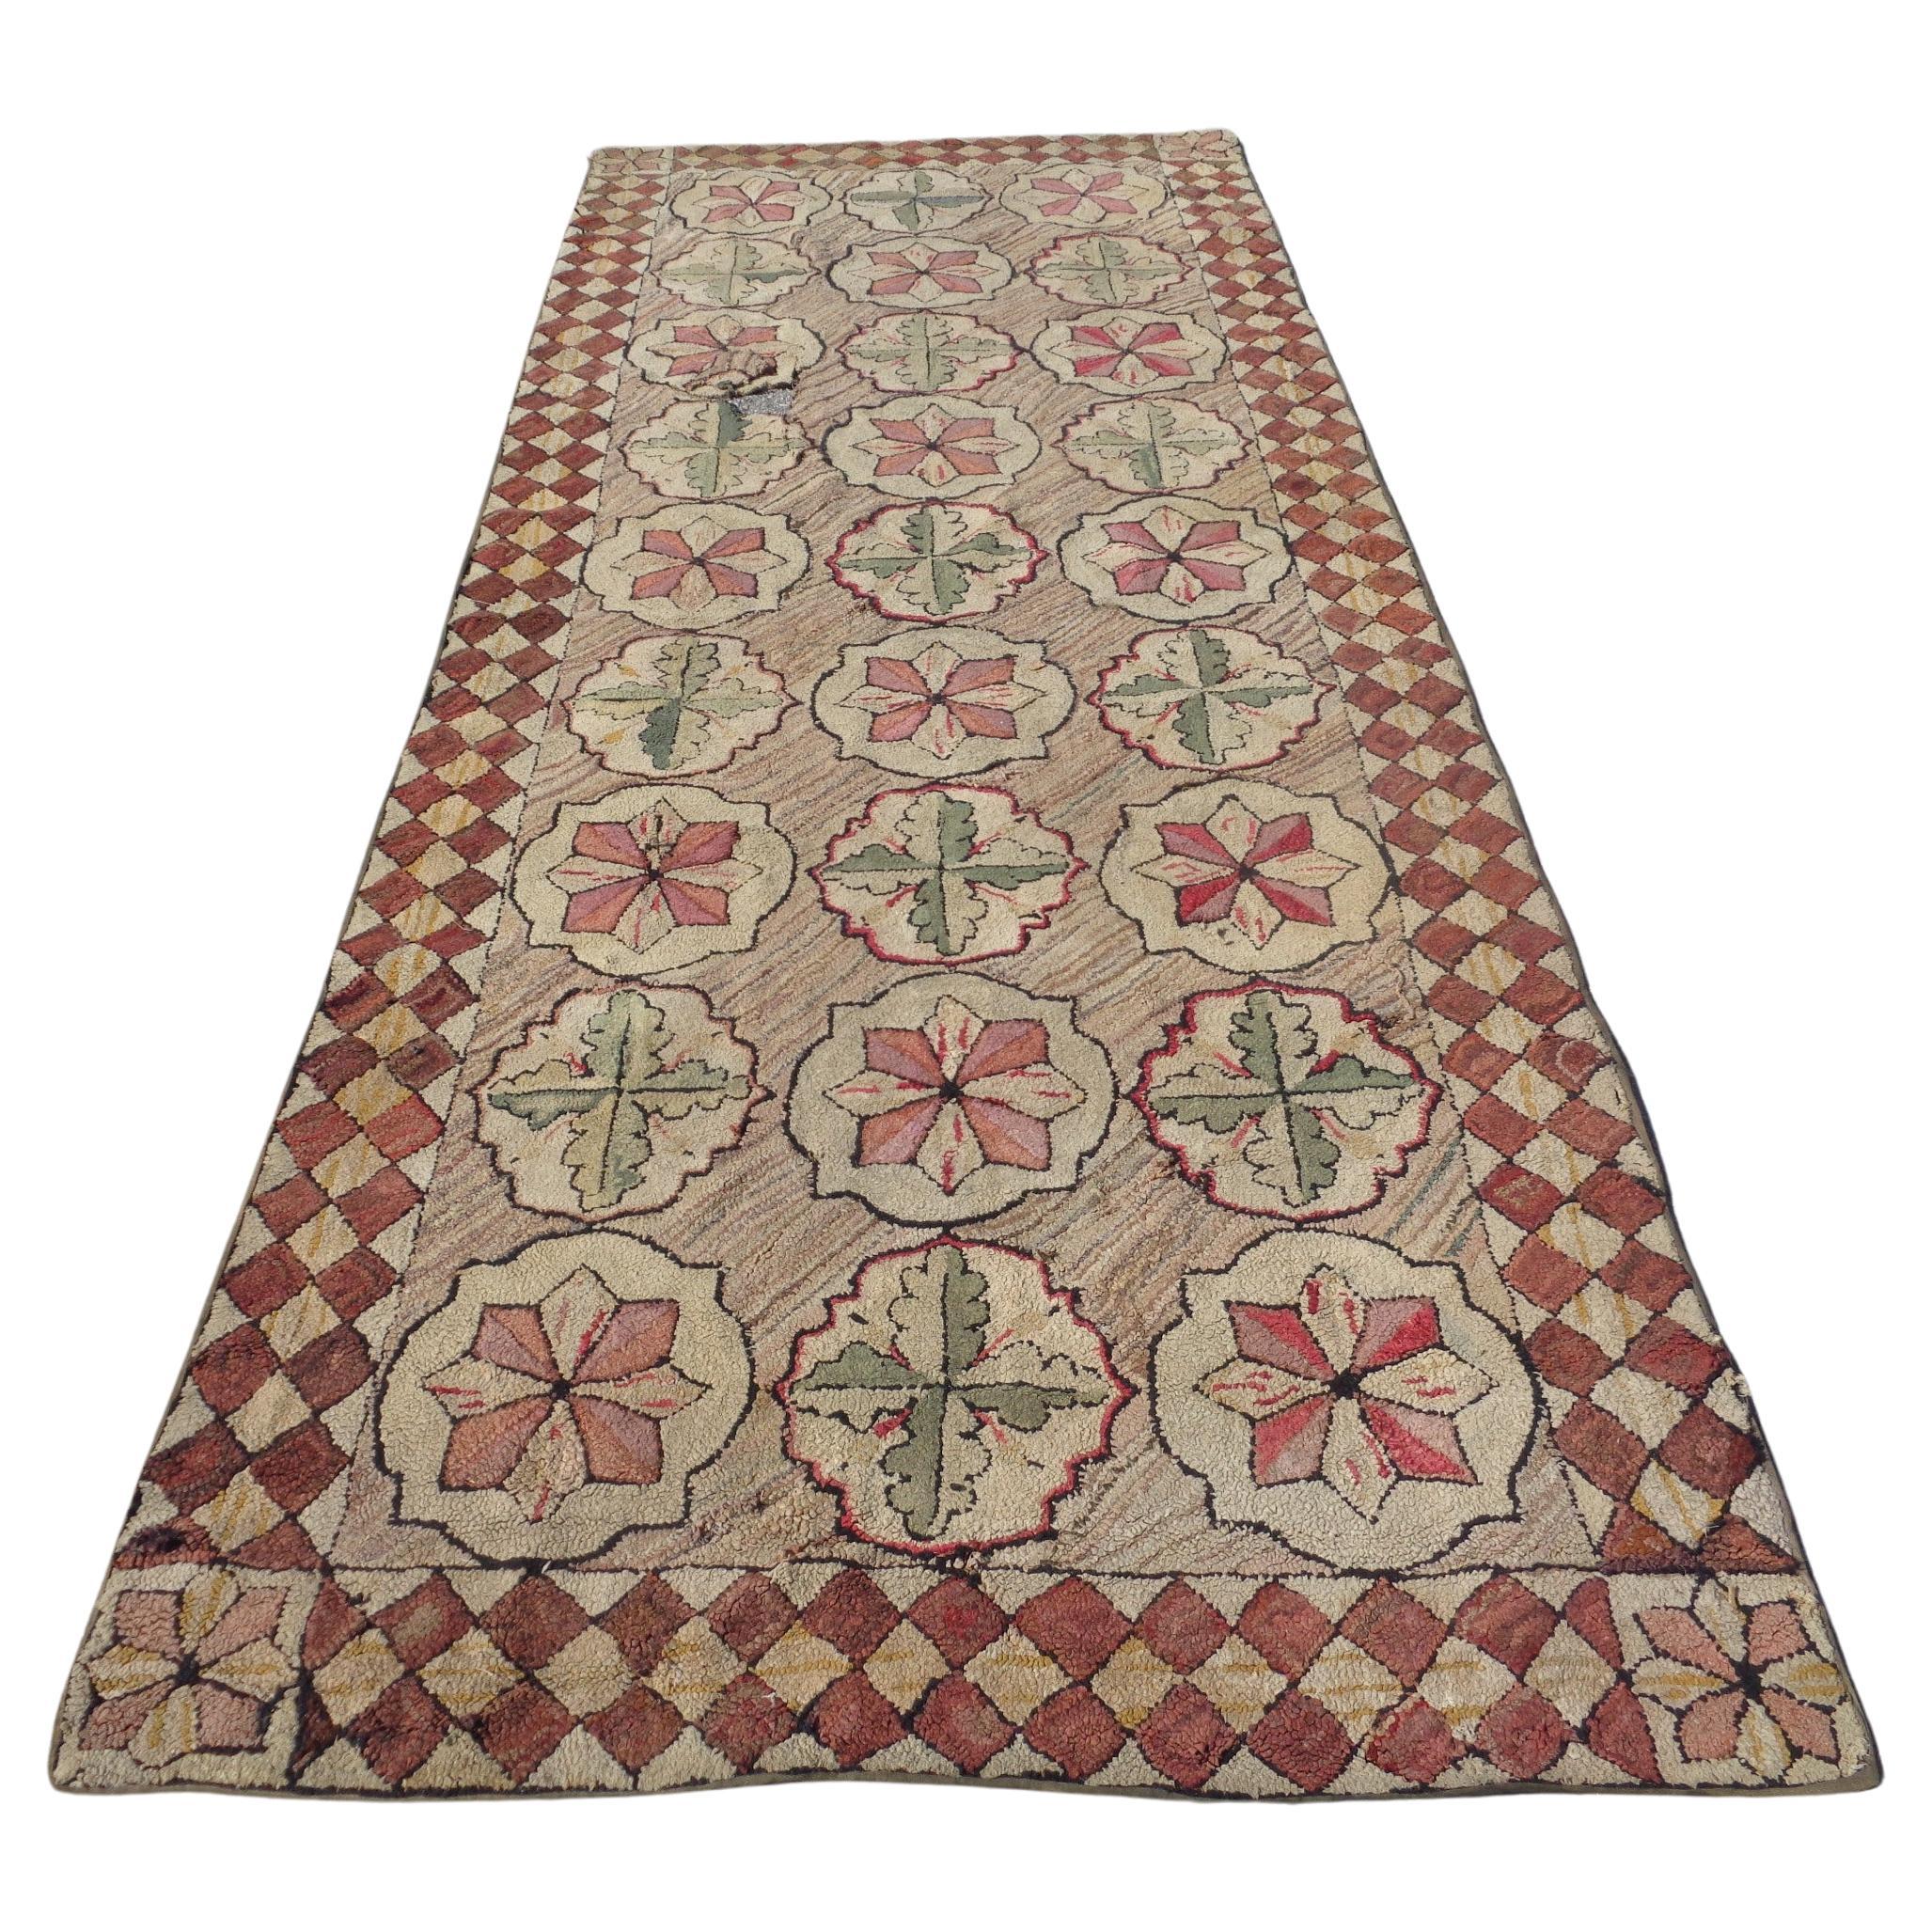 Antique American Hand Woven Hooked Rug Long Runner, Circa 1880-1900 For Sale